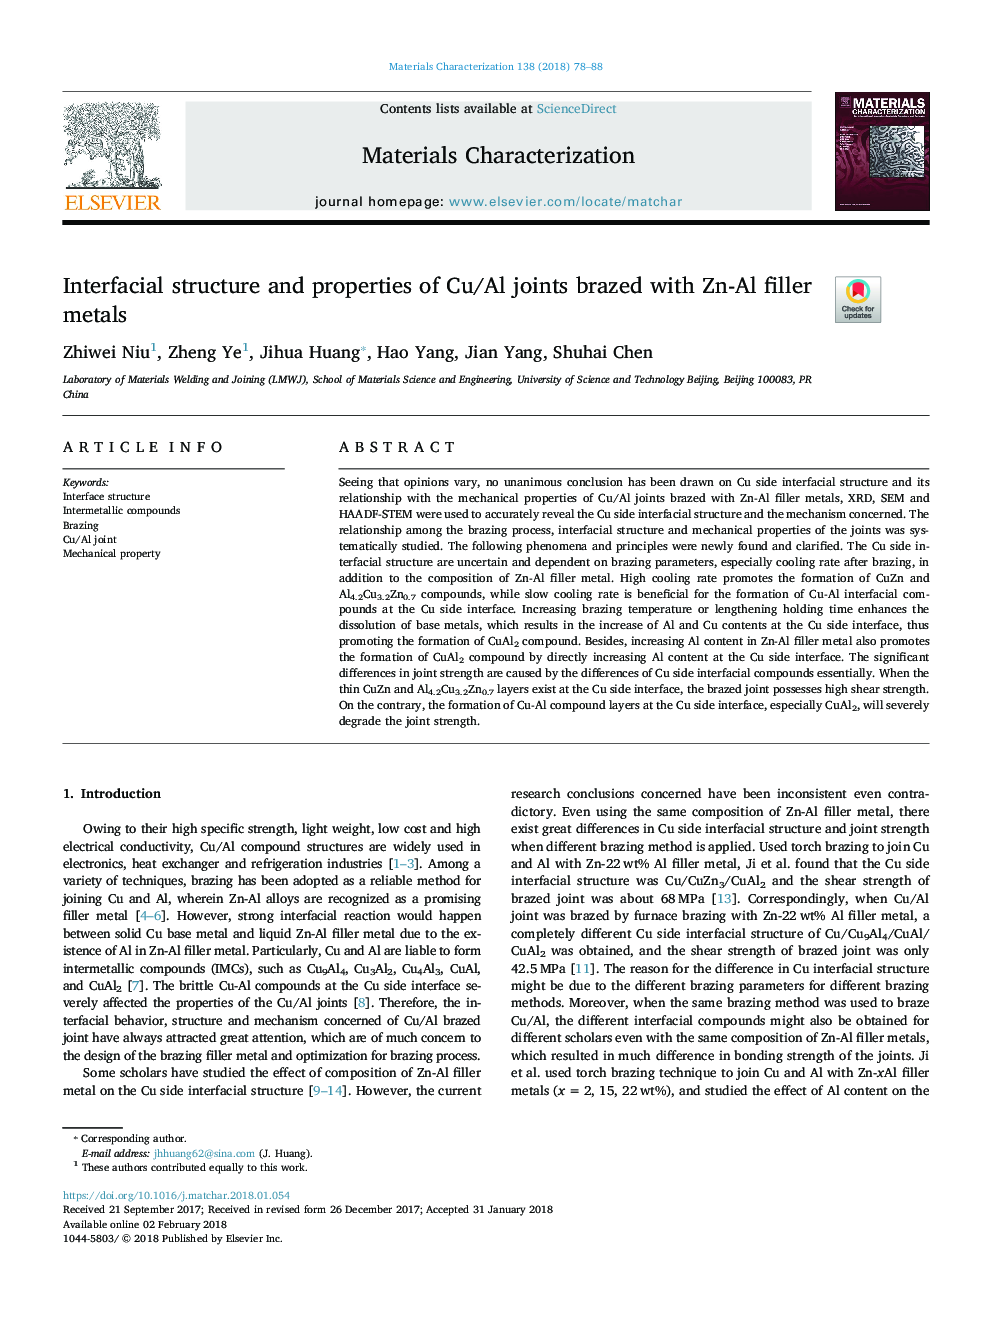 Interfacial structure and properties of Cu/Al joints brazed with Zn-Al filler metals